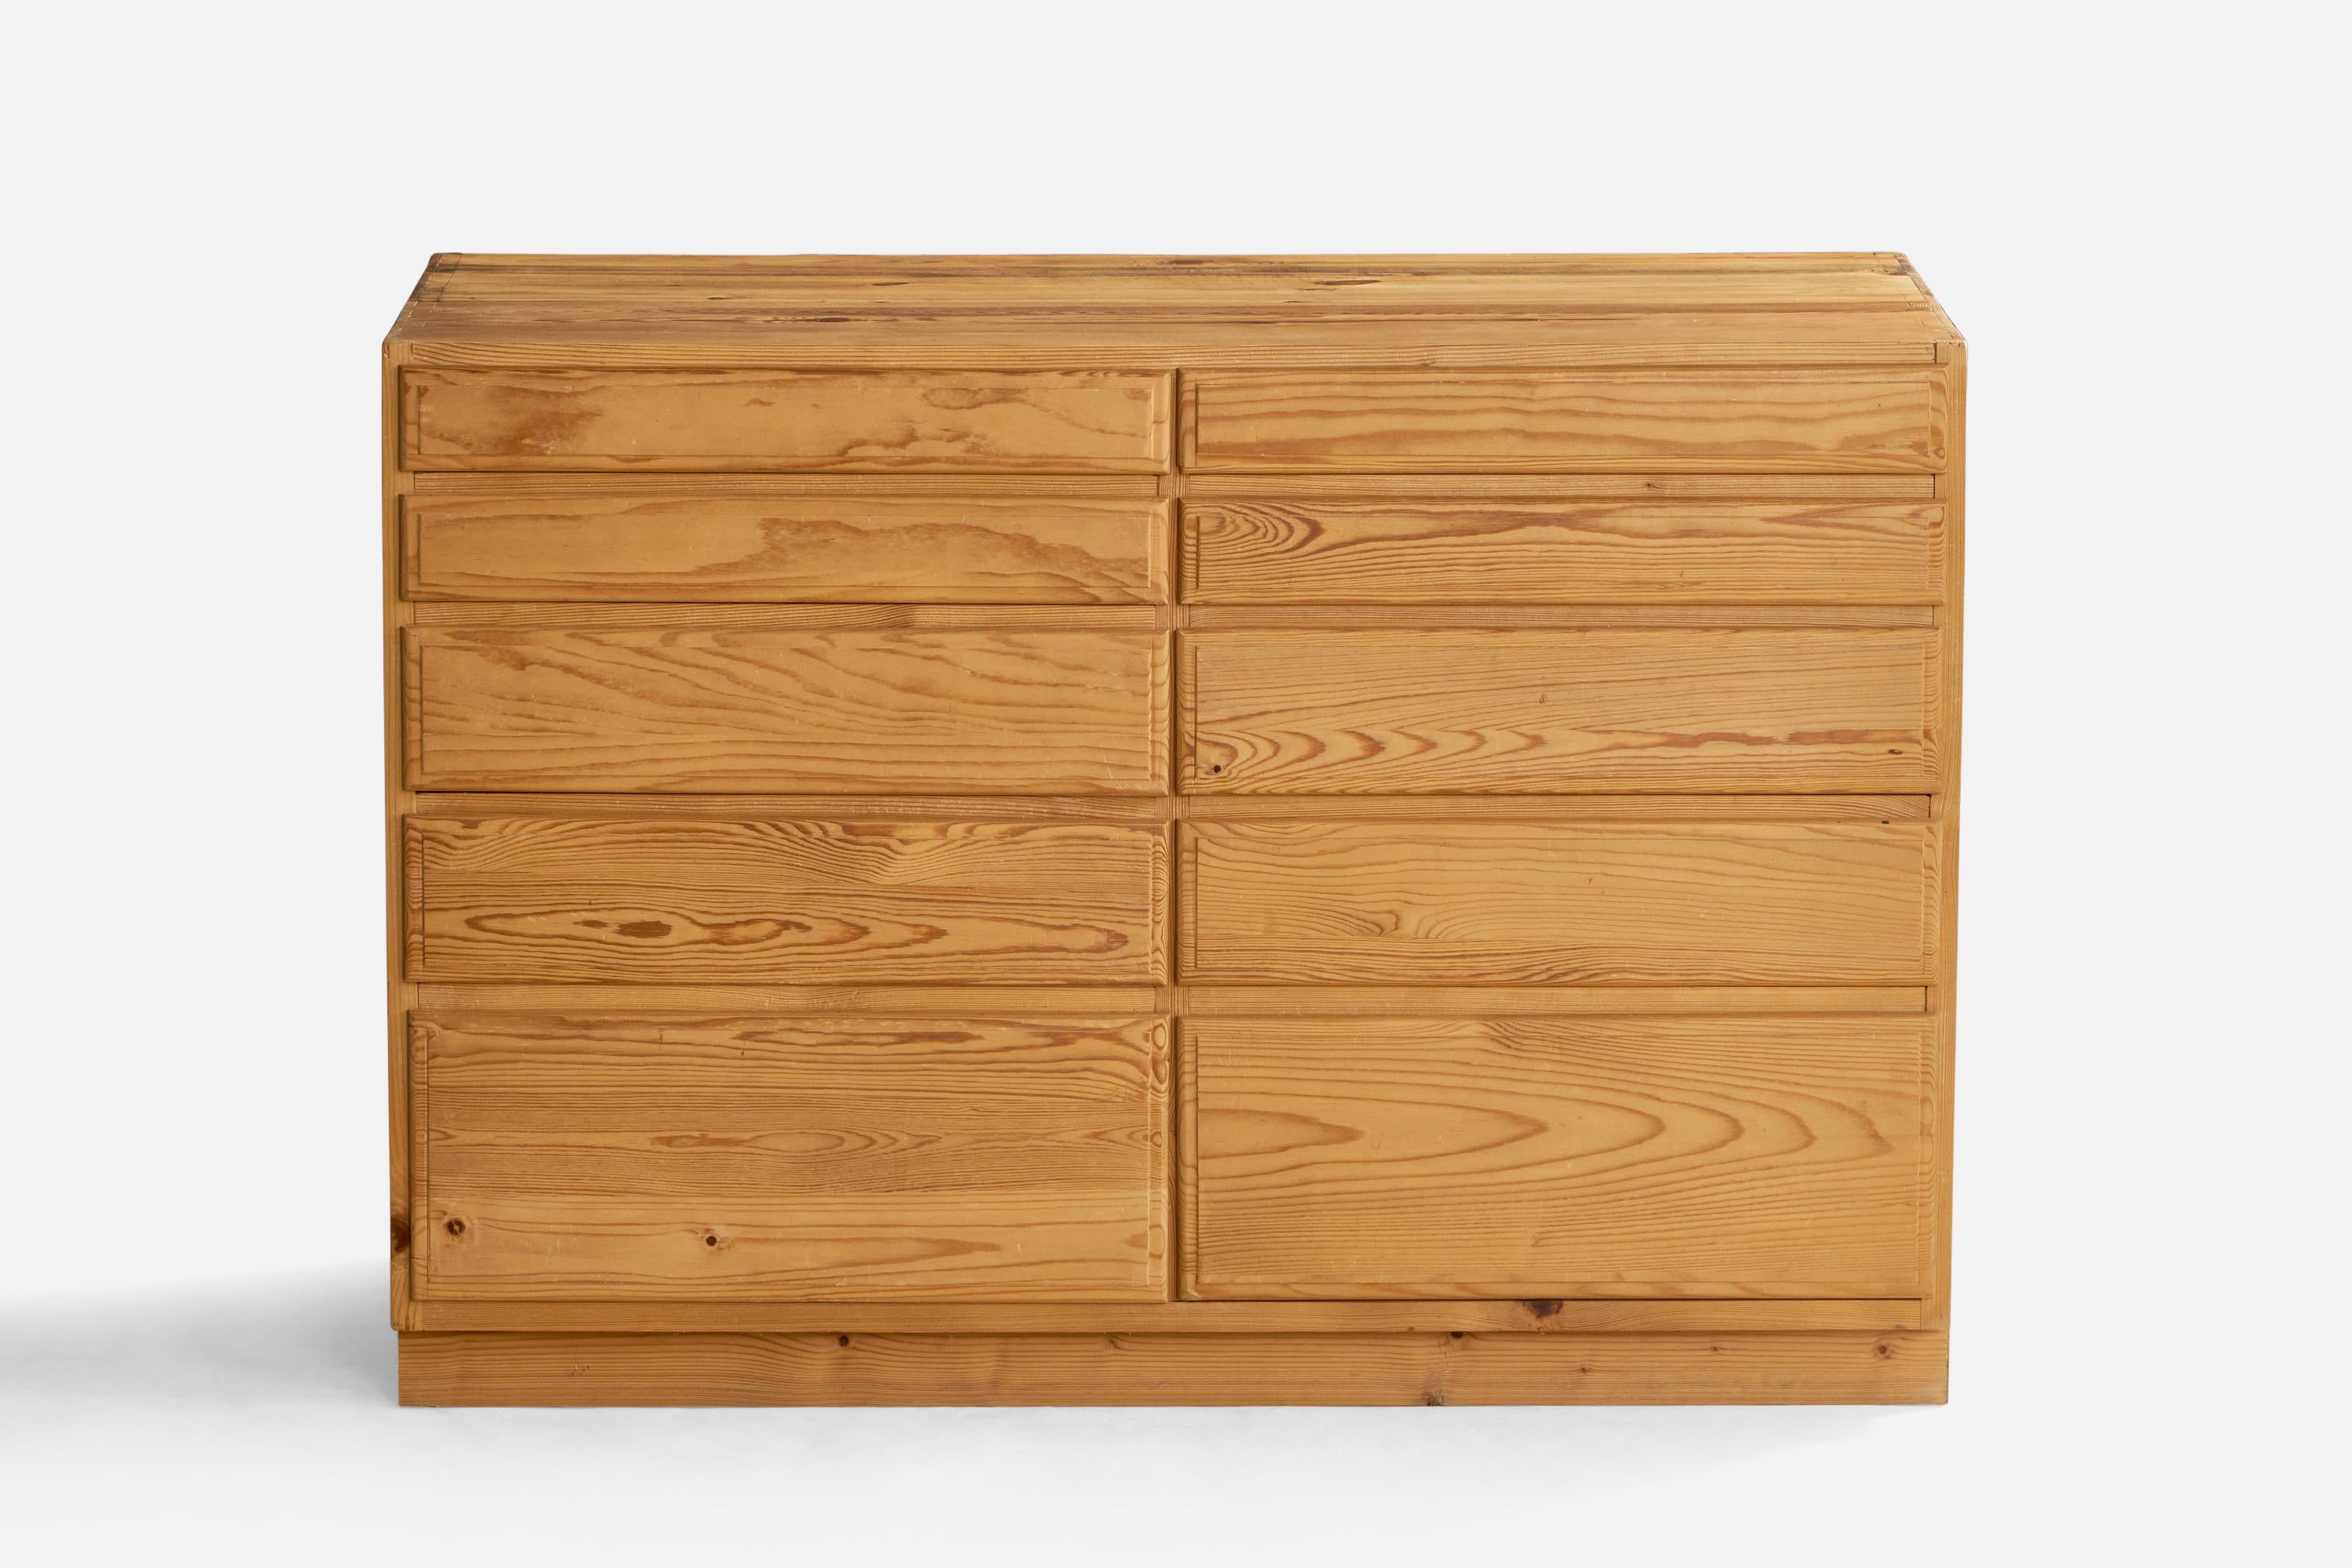 A pine chest of drawers or dresser designed and produced in Sweden, 1960s.